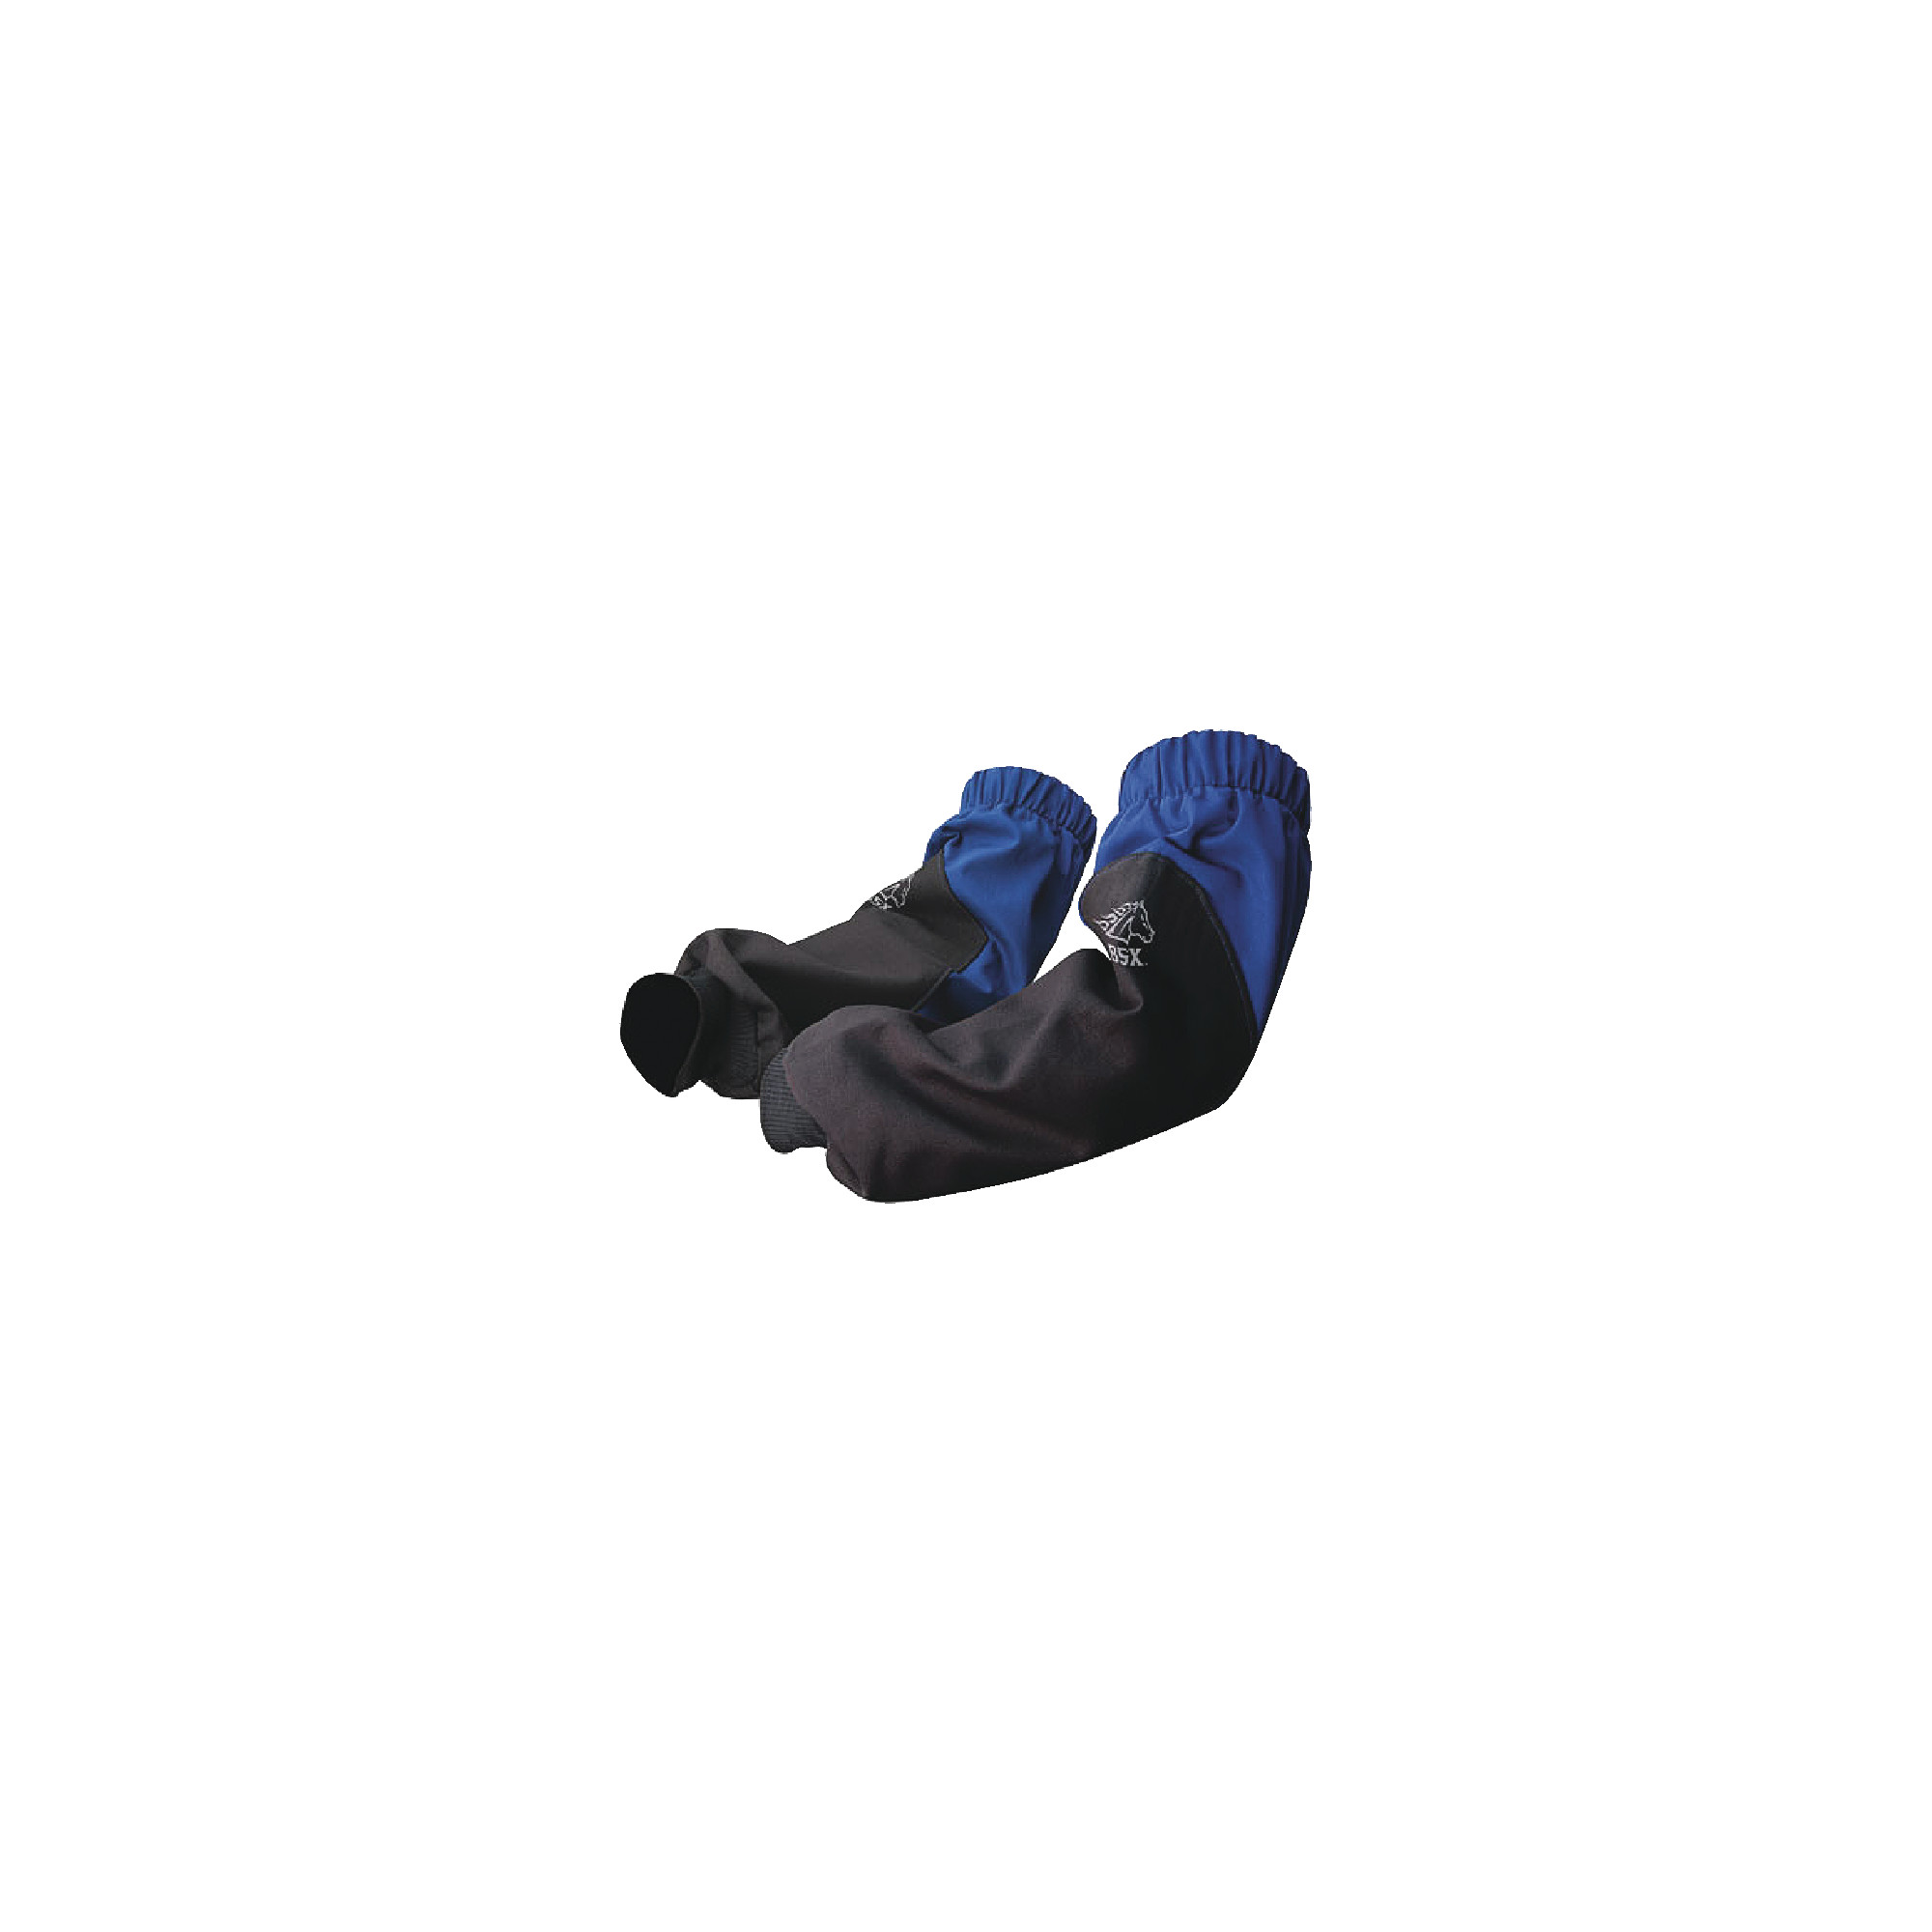 BSX Fire Resistant Sleeve Extenders - Royal Blue